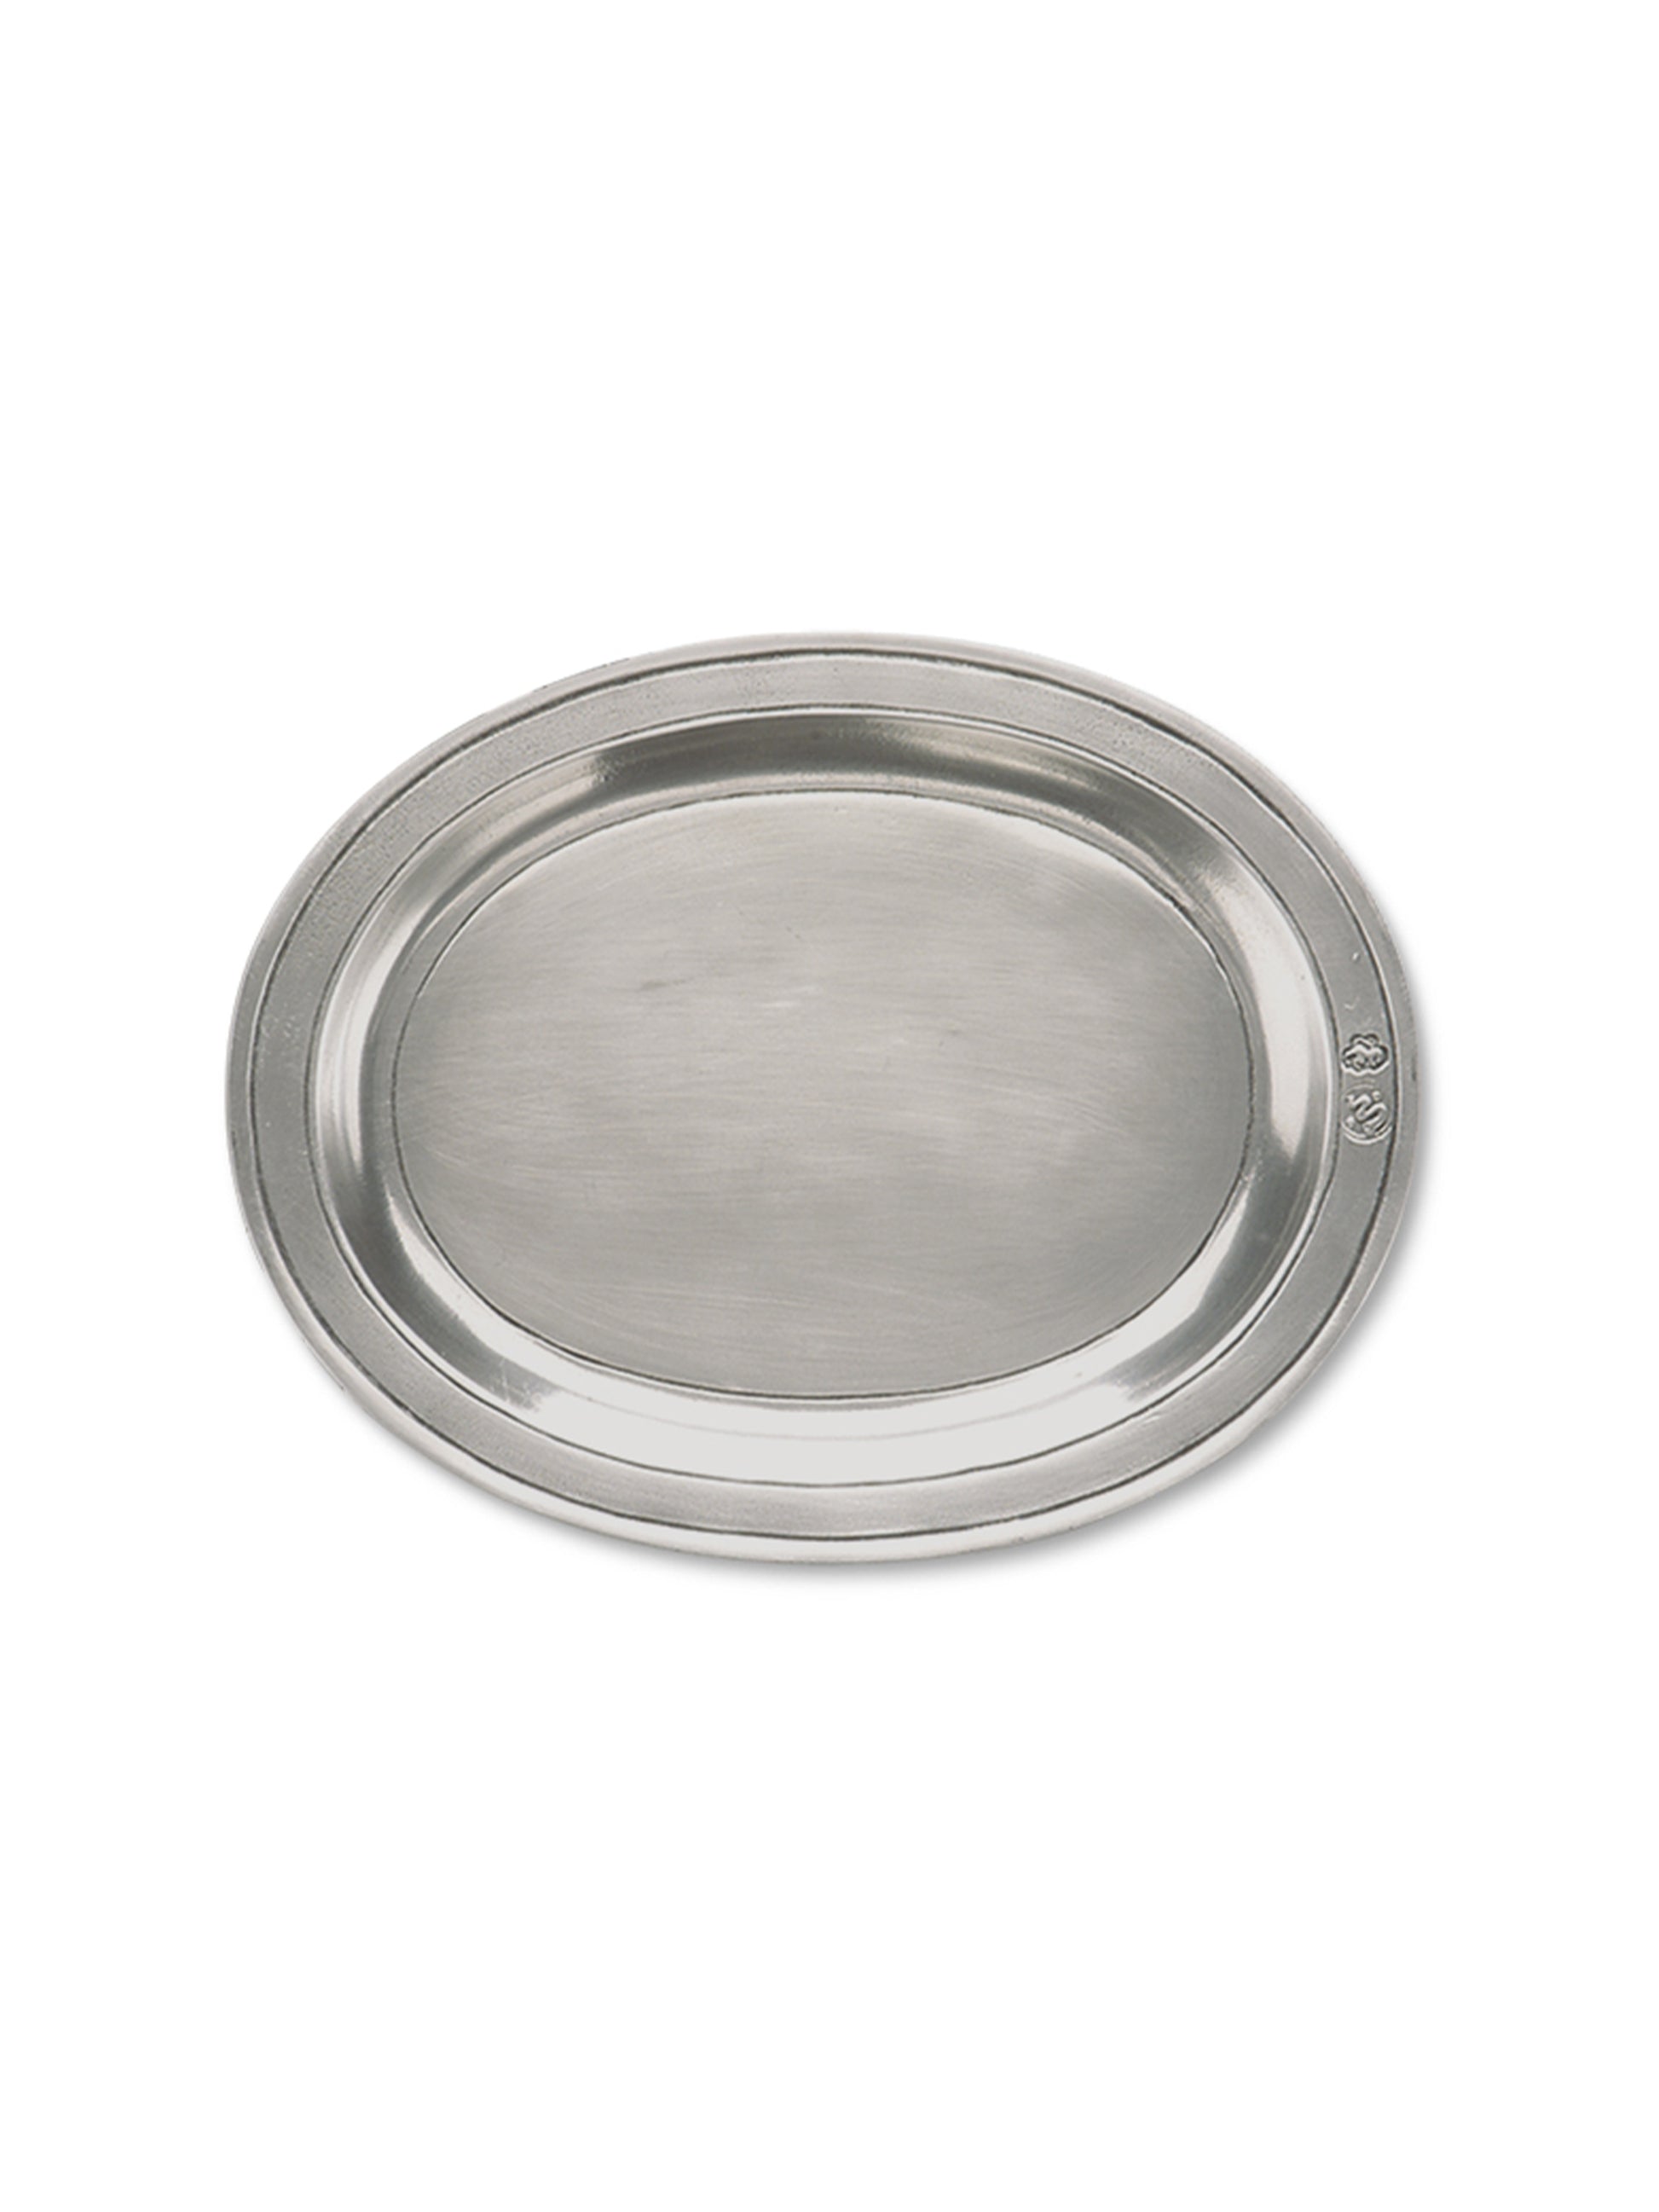 MATCH Pewter Small Incised Oval Tray Weston Table